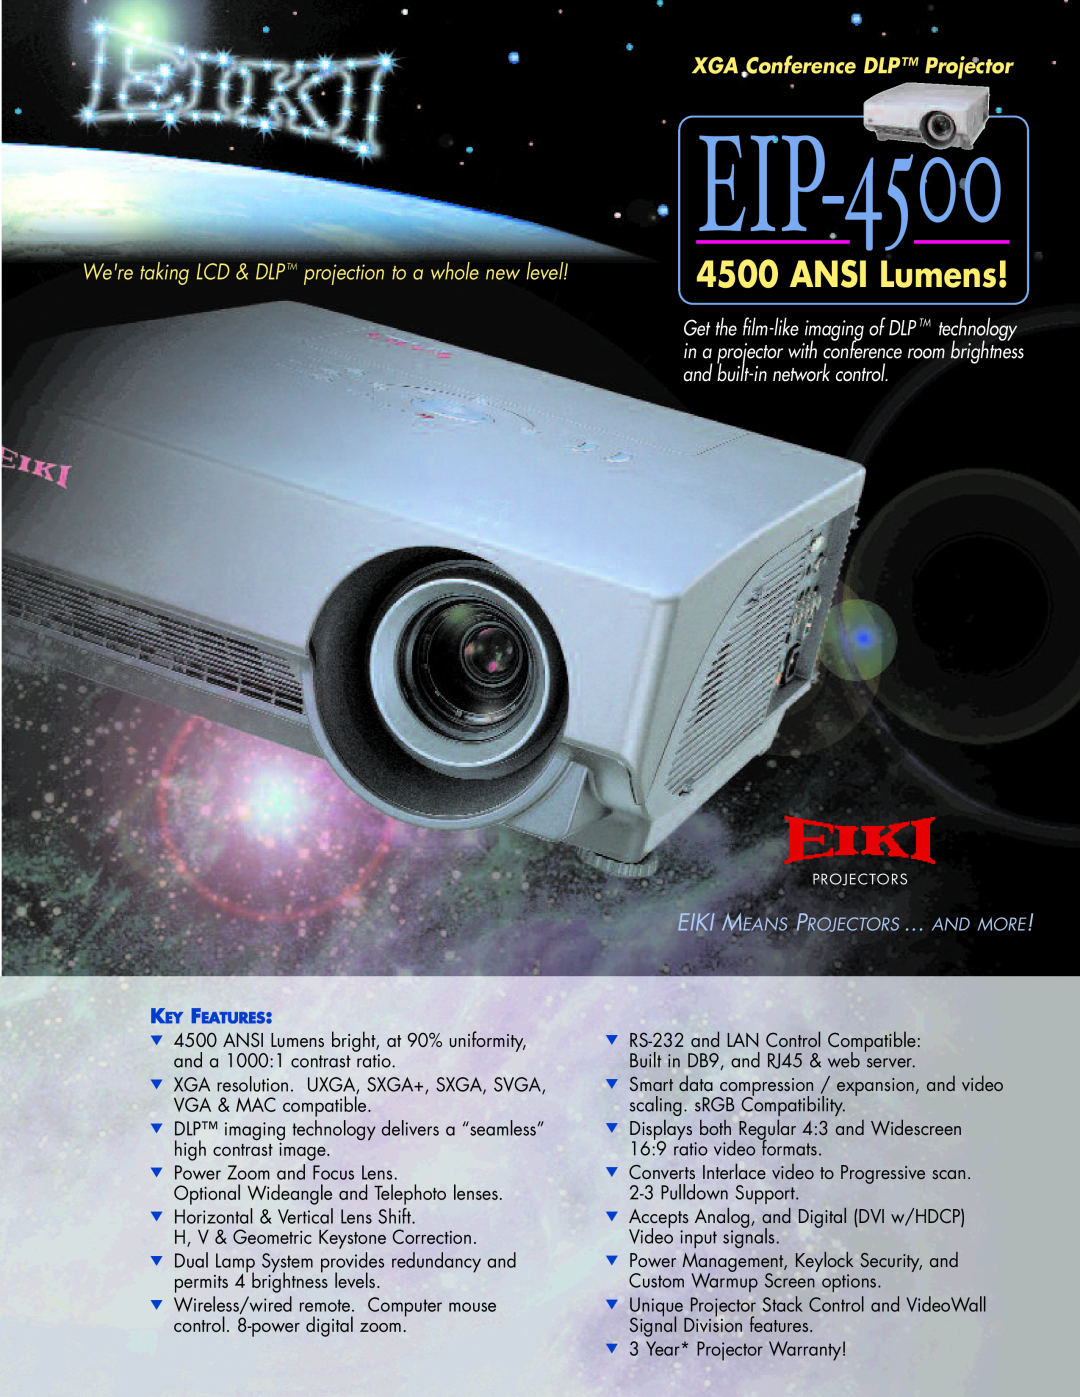 Eiki EIP-4500 warranty ANSI Lumens, XGA Conference DLP Projector, and built-innetwork control 